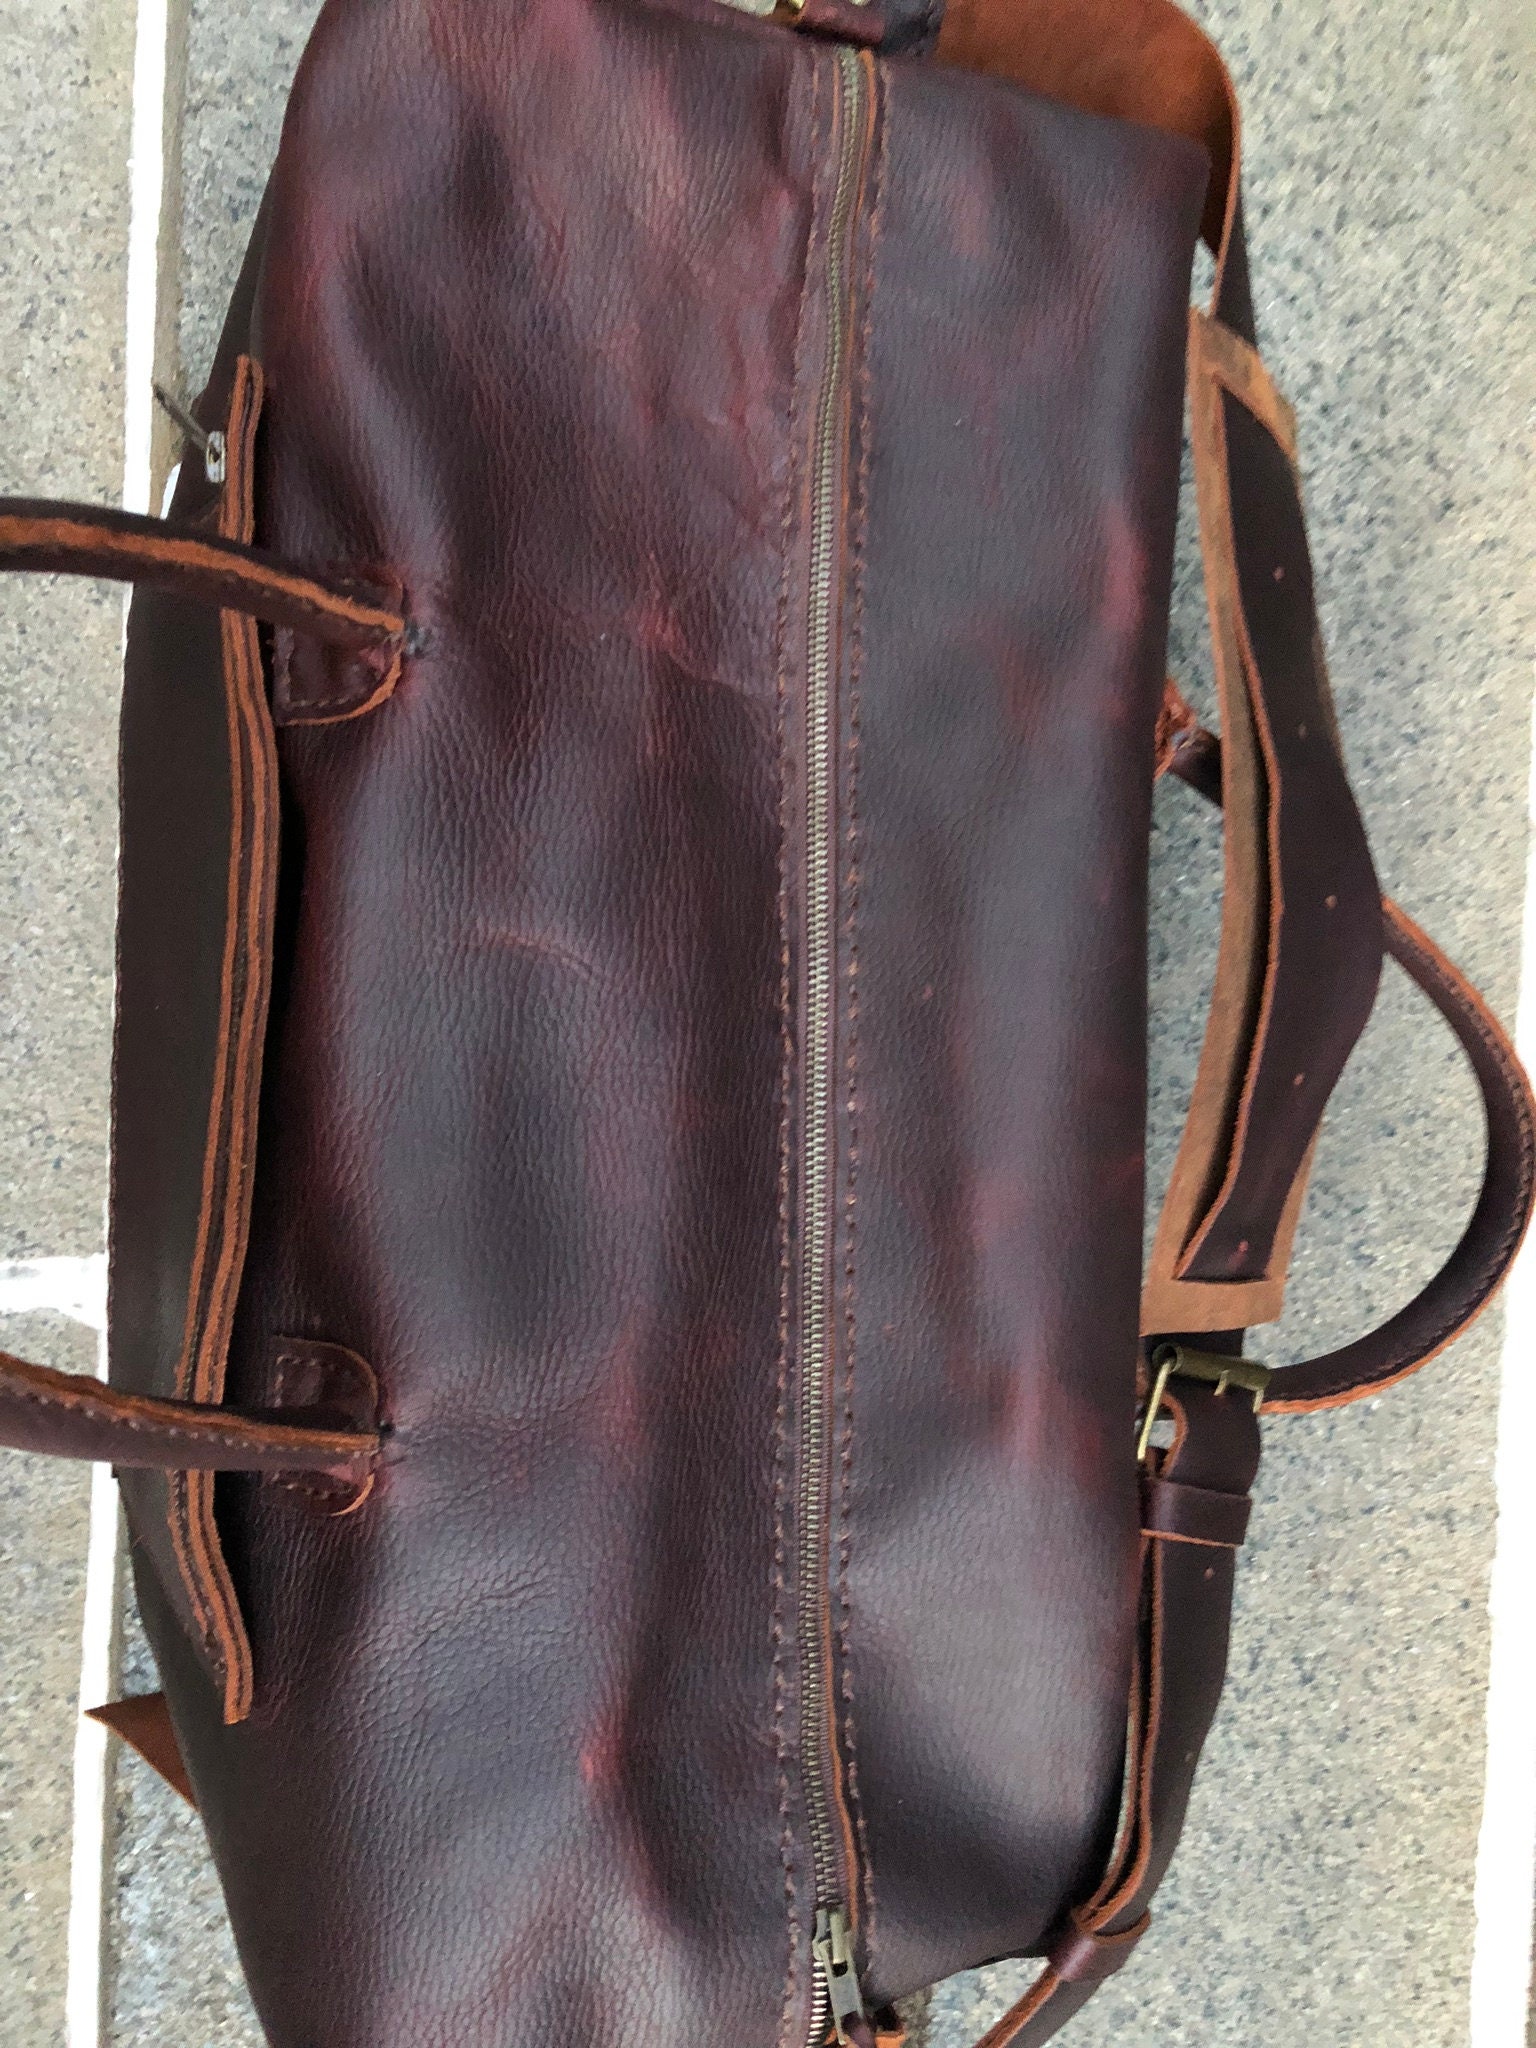 Duffle bag / Brown leather duffle / Leather duffle made in the USA